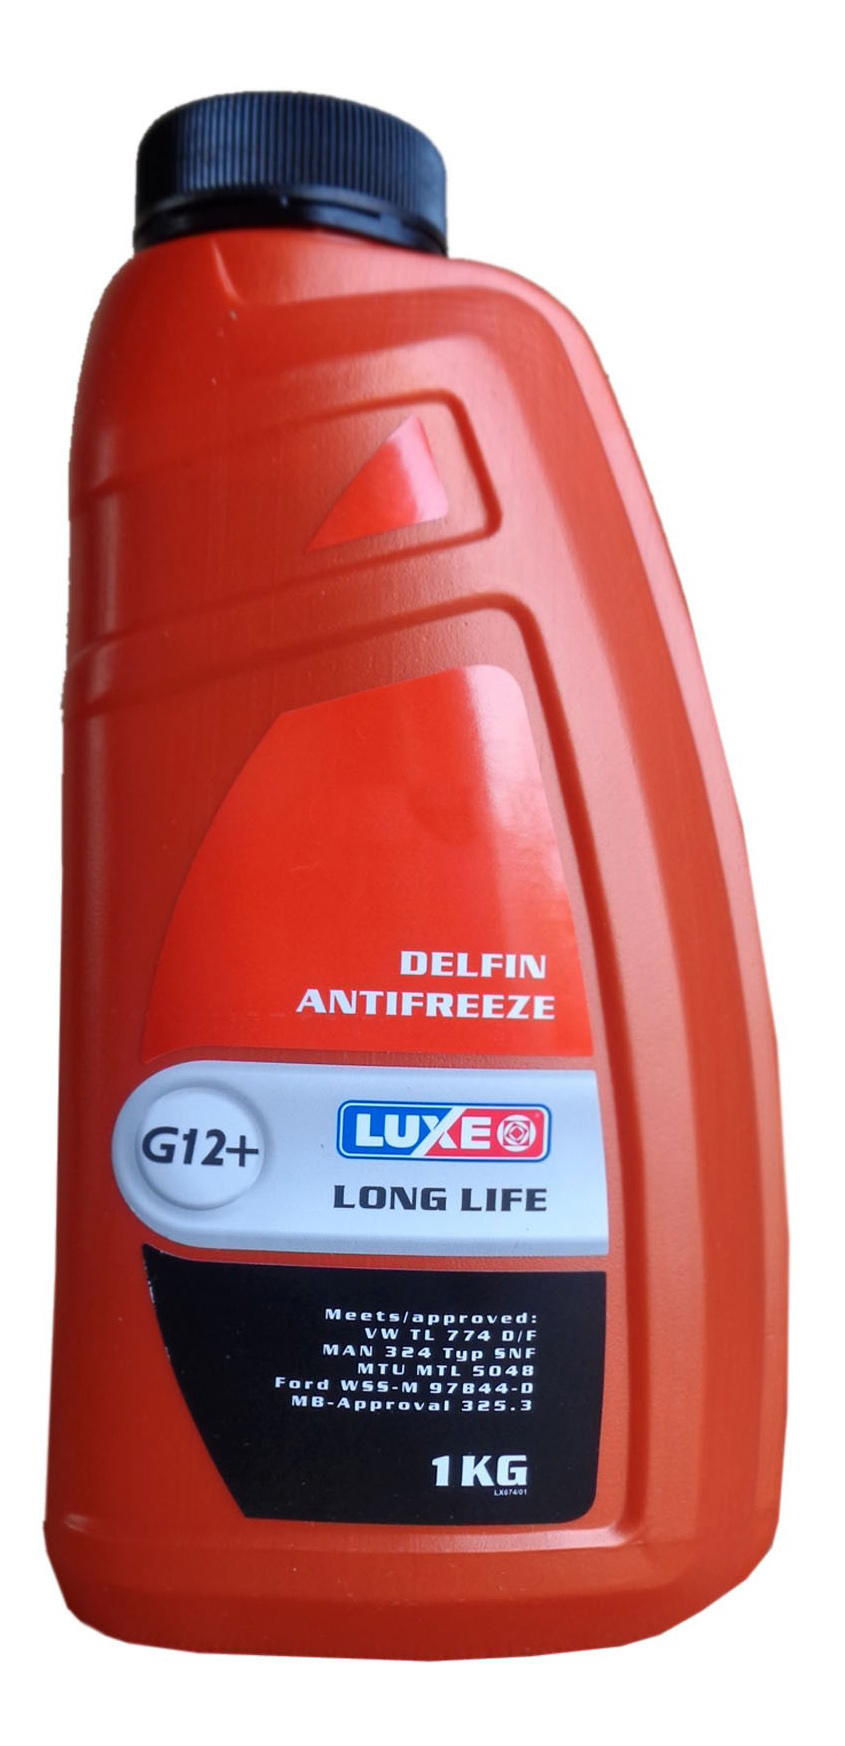 Luxe 674 Antifreeze G12+ RED LINE LONG LIFE, 1 l 674